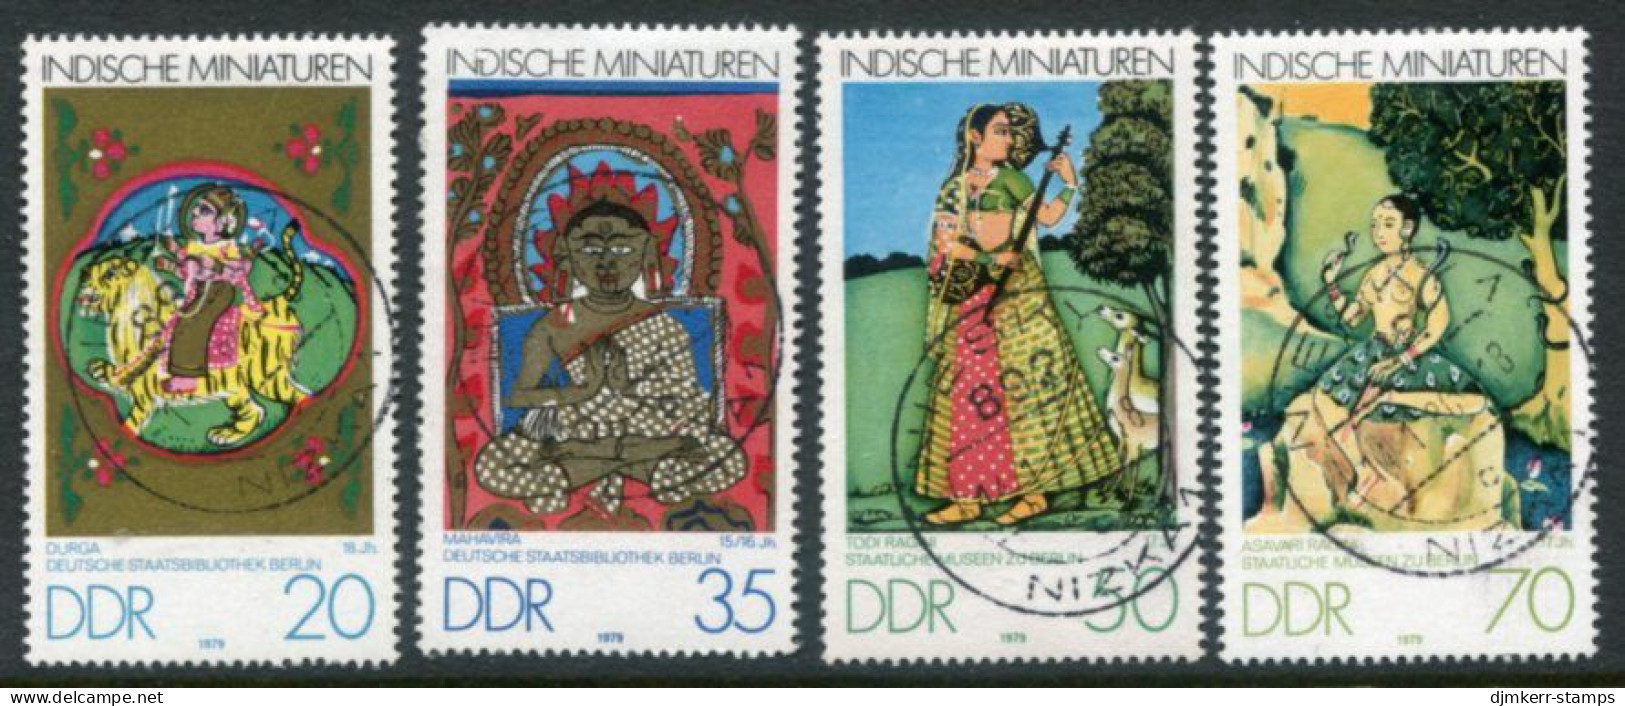 DDR / E. GERMANY 1979 Indian Miniatures Used.  Michel  2418-21 - Used Stamps